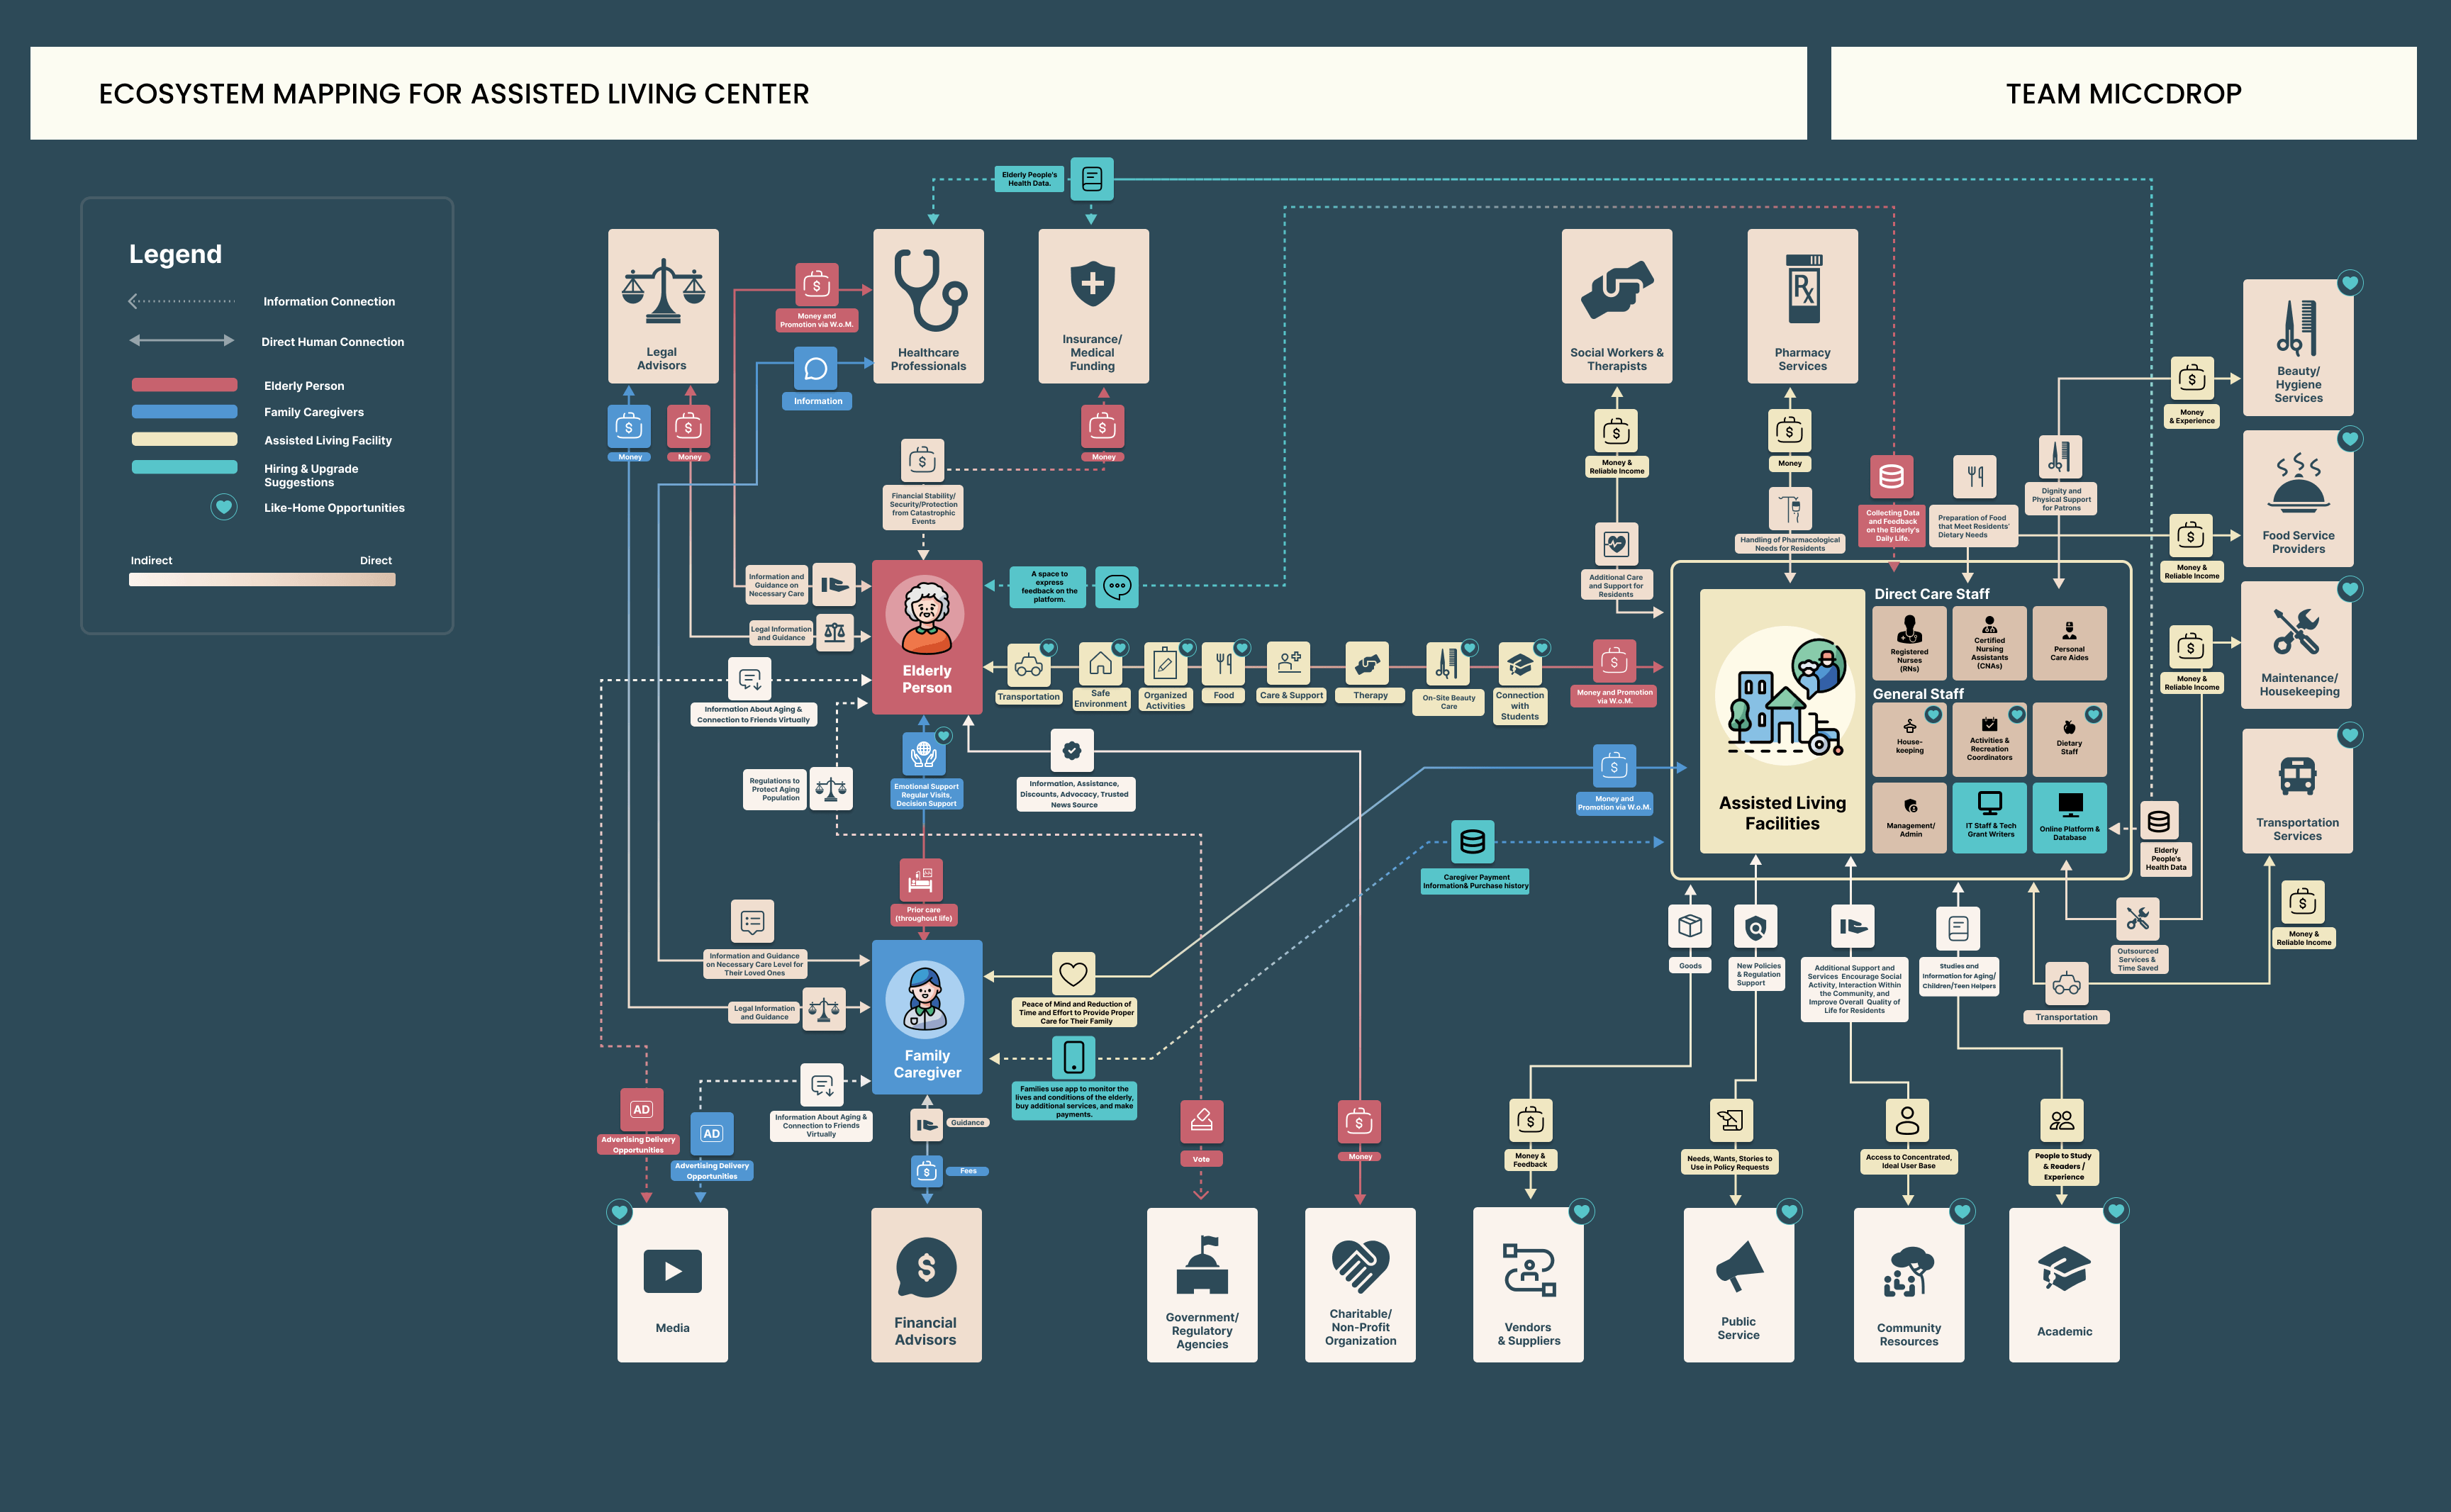 ecosystem map depicting how all the actors could related to each other in the future